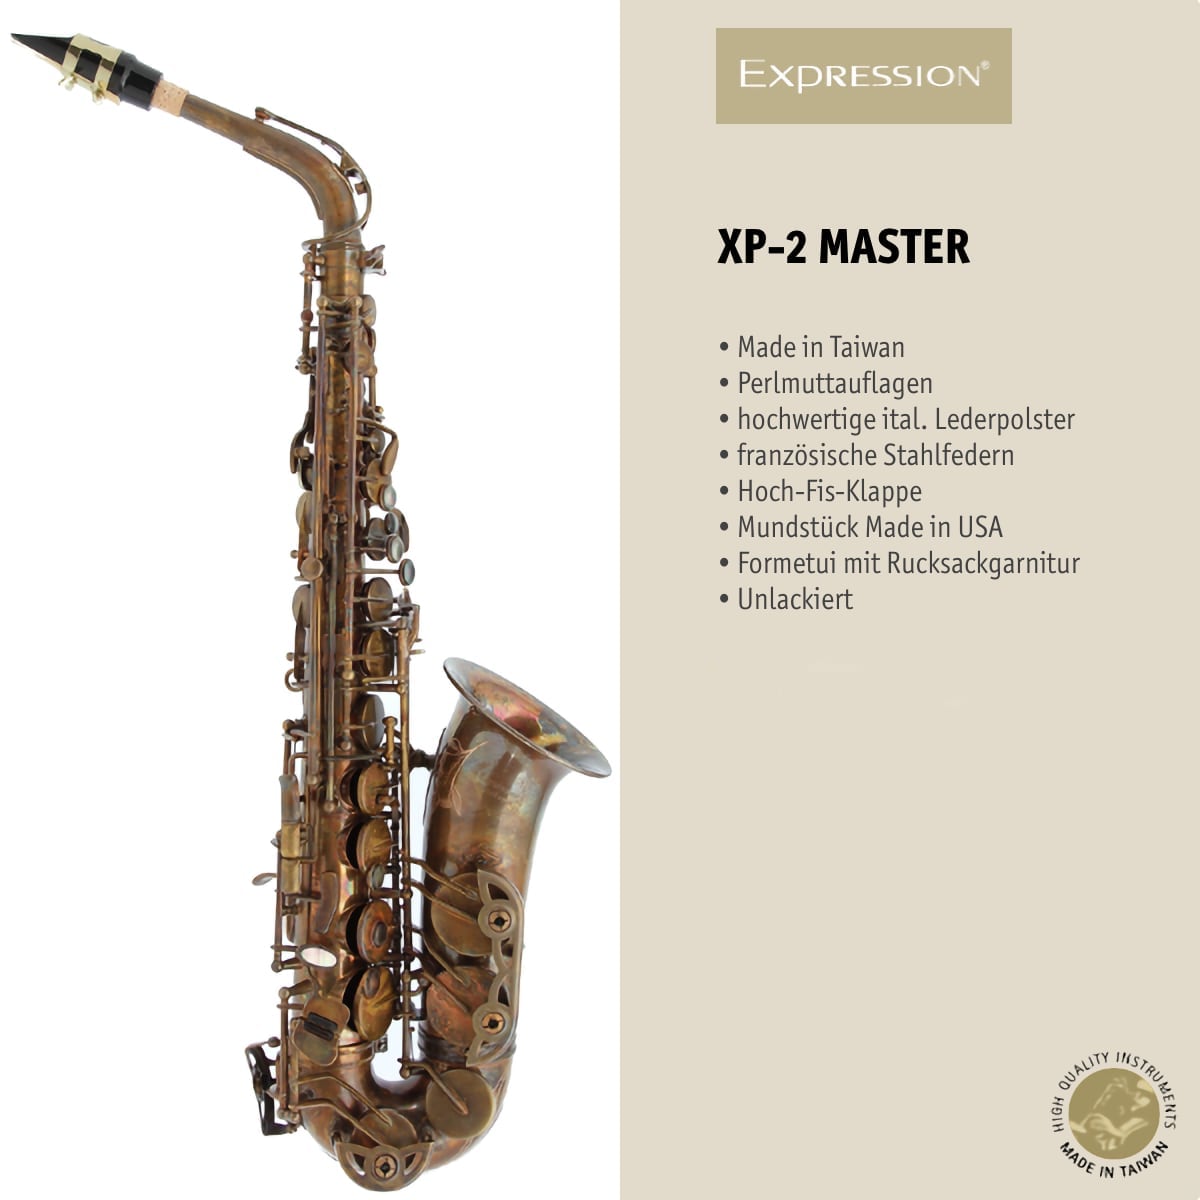 EXPRESSION Instruments XP-2 MASTER